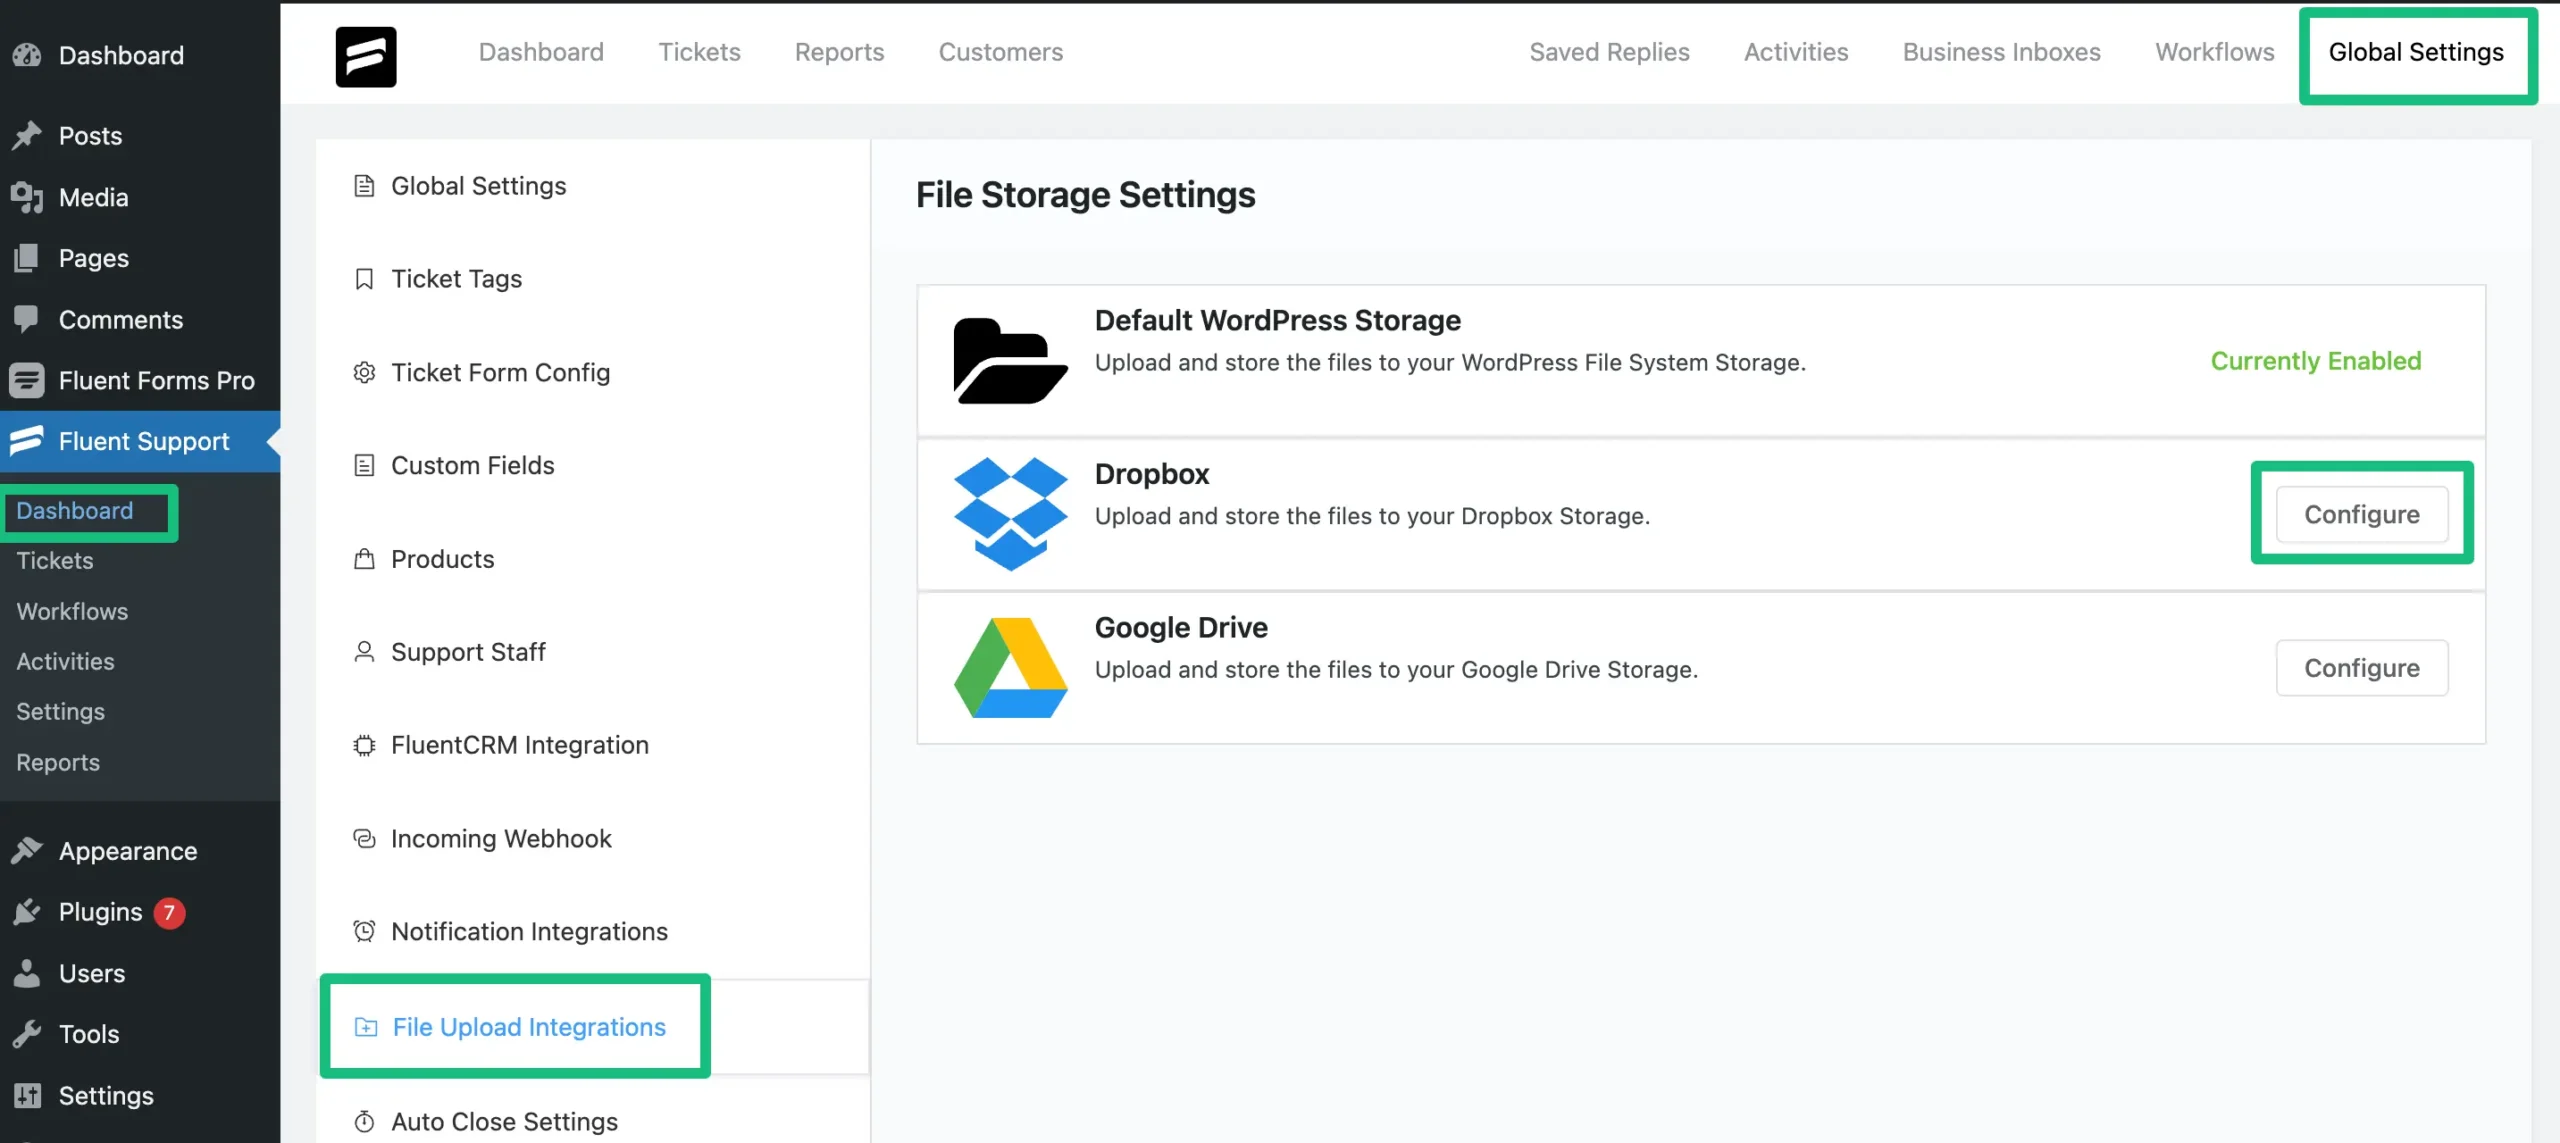 Dropbox Configure option from Fluent Support dashboard